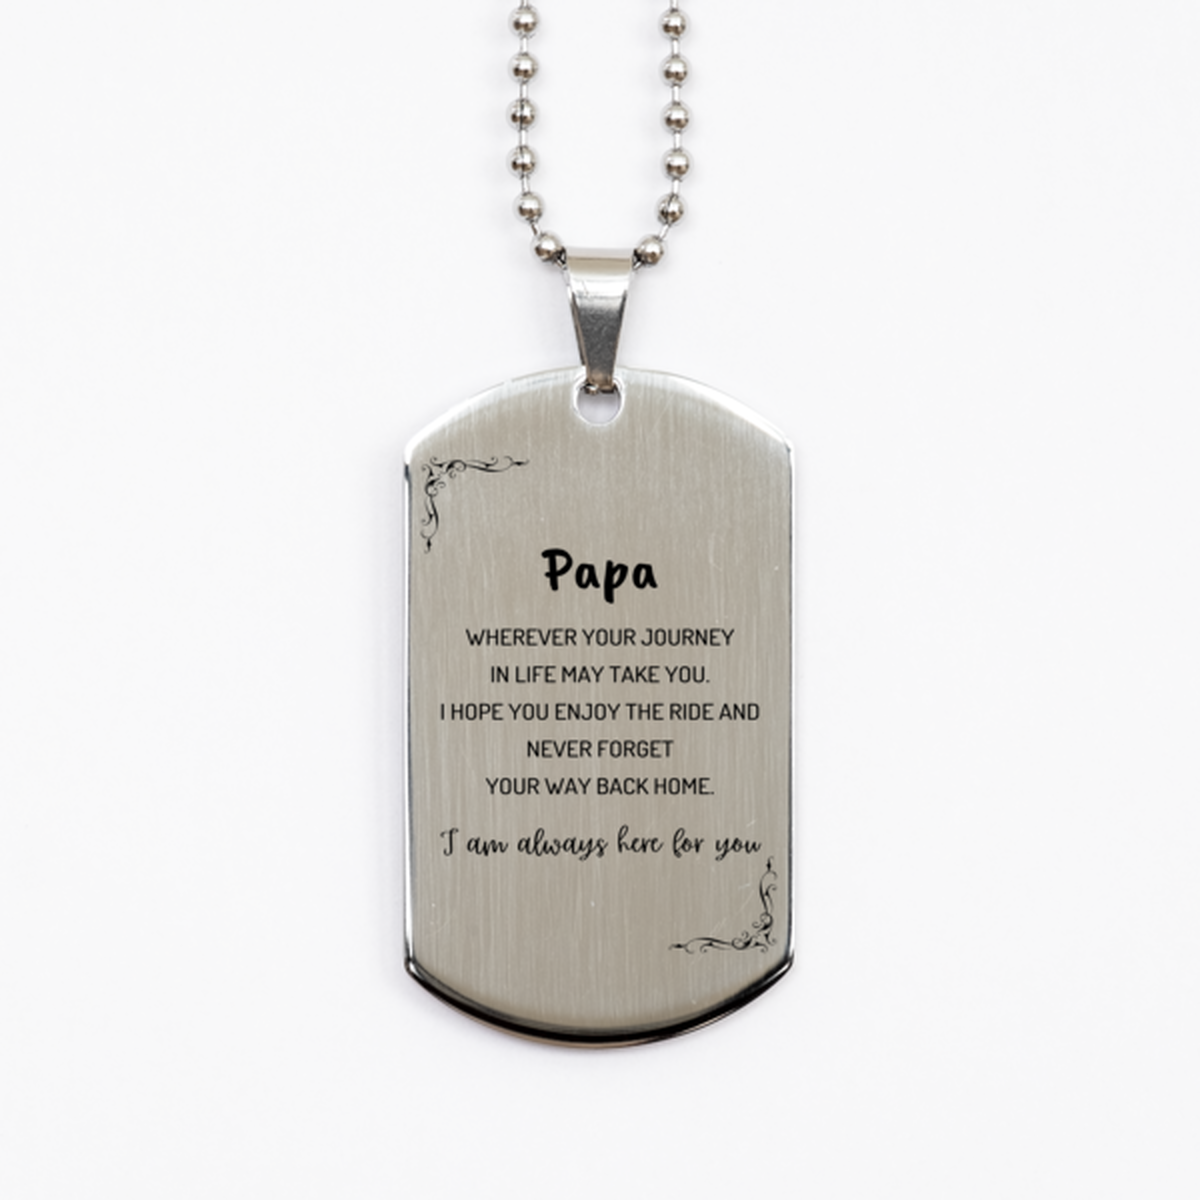 Papa wherever your journey in life may take you, I am always here for you Papa Silver Dog Tag, Awesome Christmas Gifts For Papa, Papa Birthday Gifts for Men Women Family Loved One